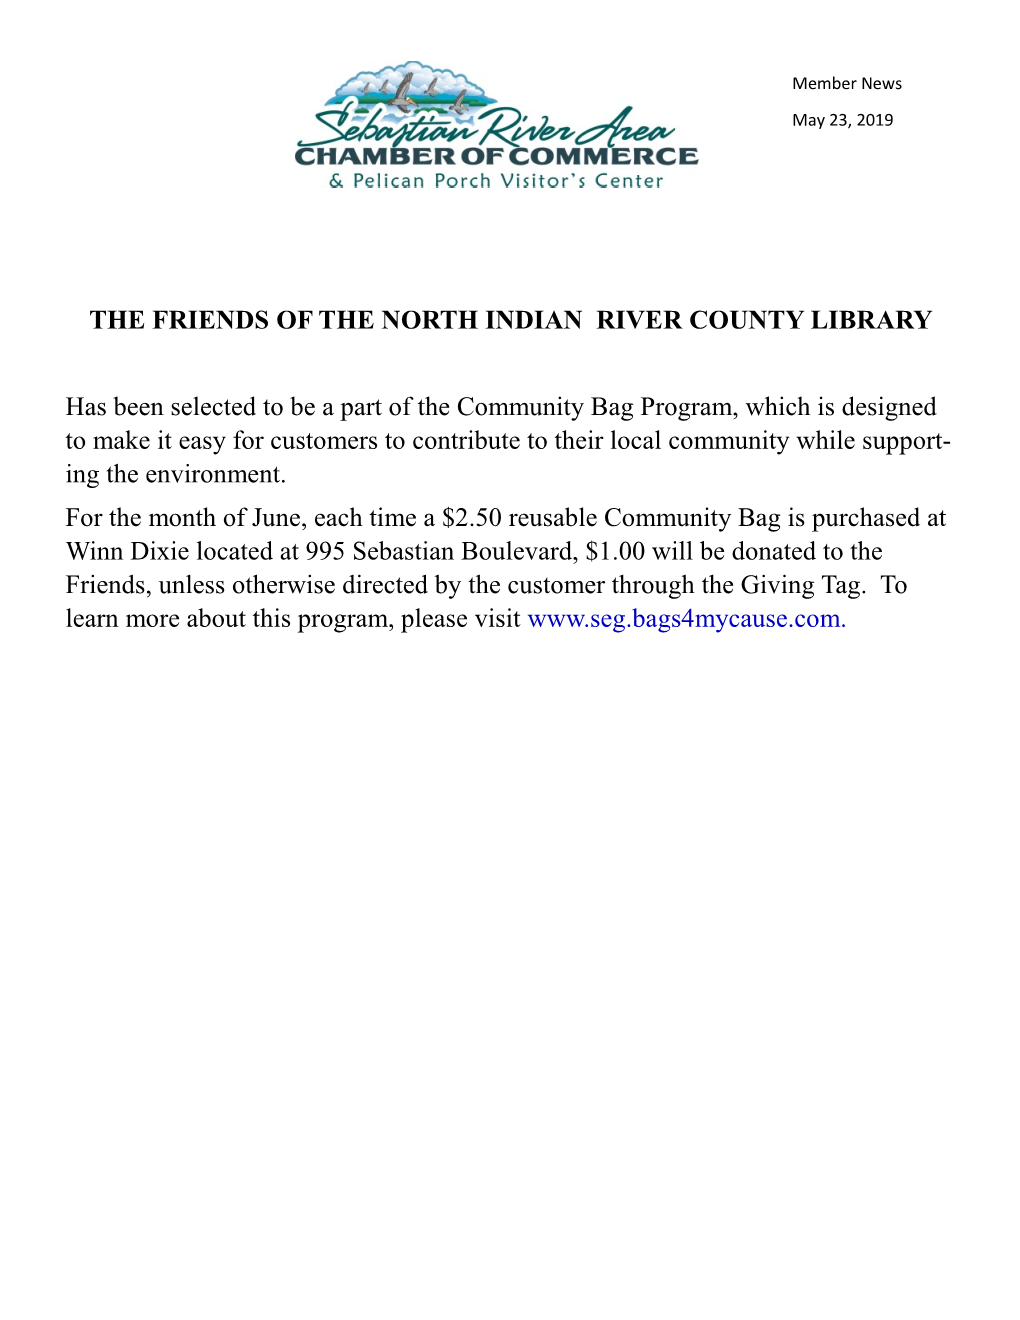 The Friends of the North Indian River County Library